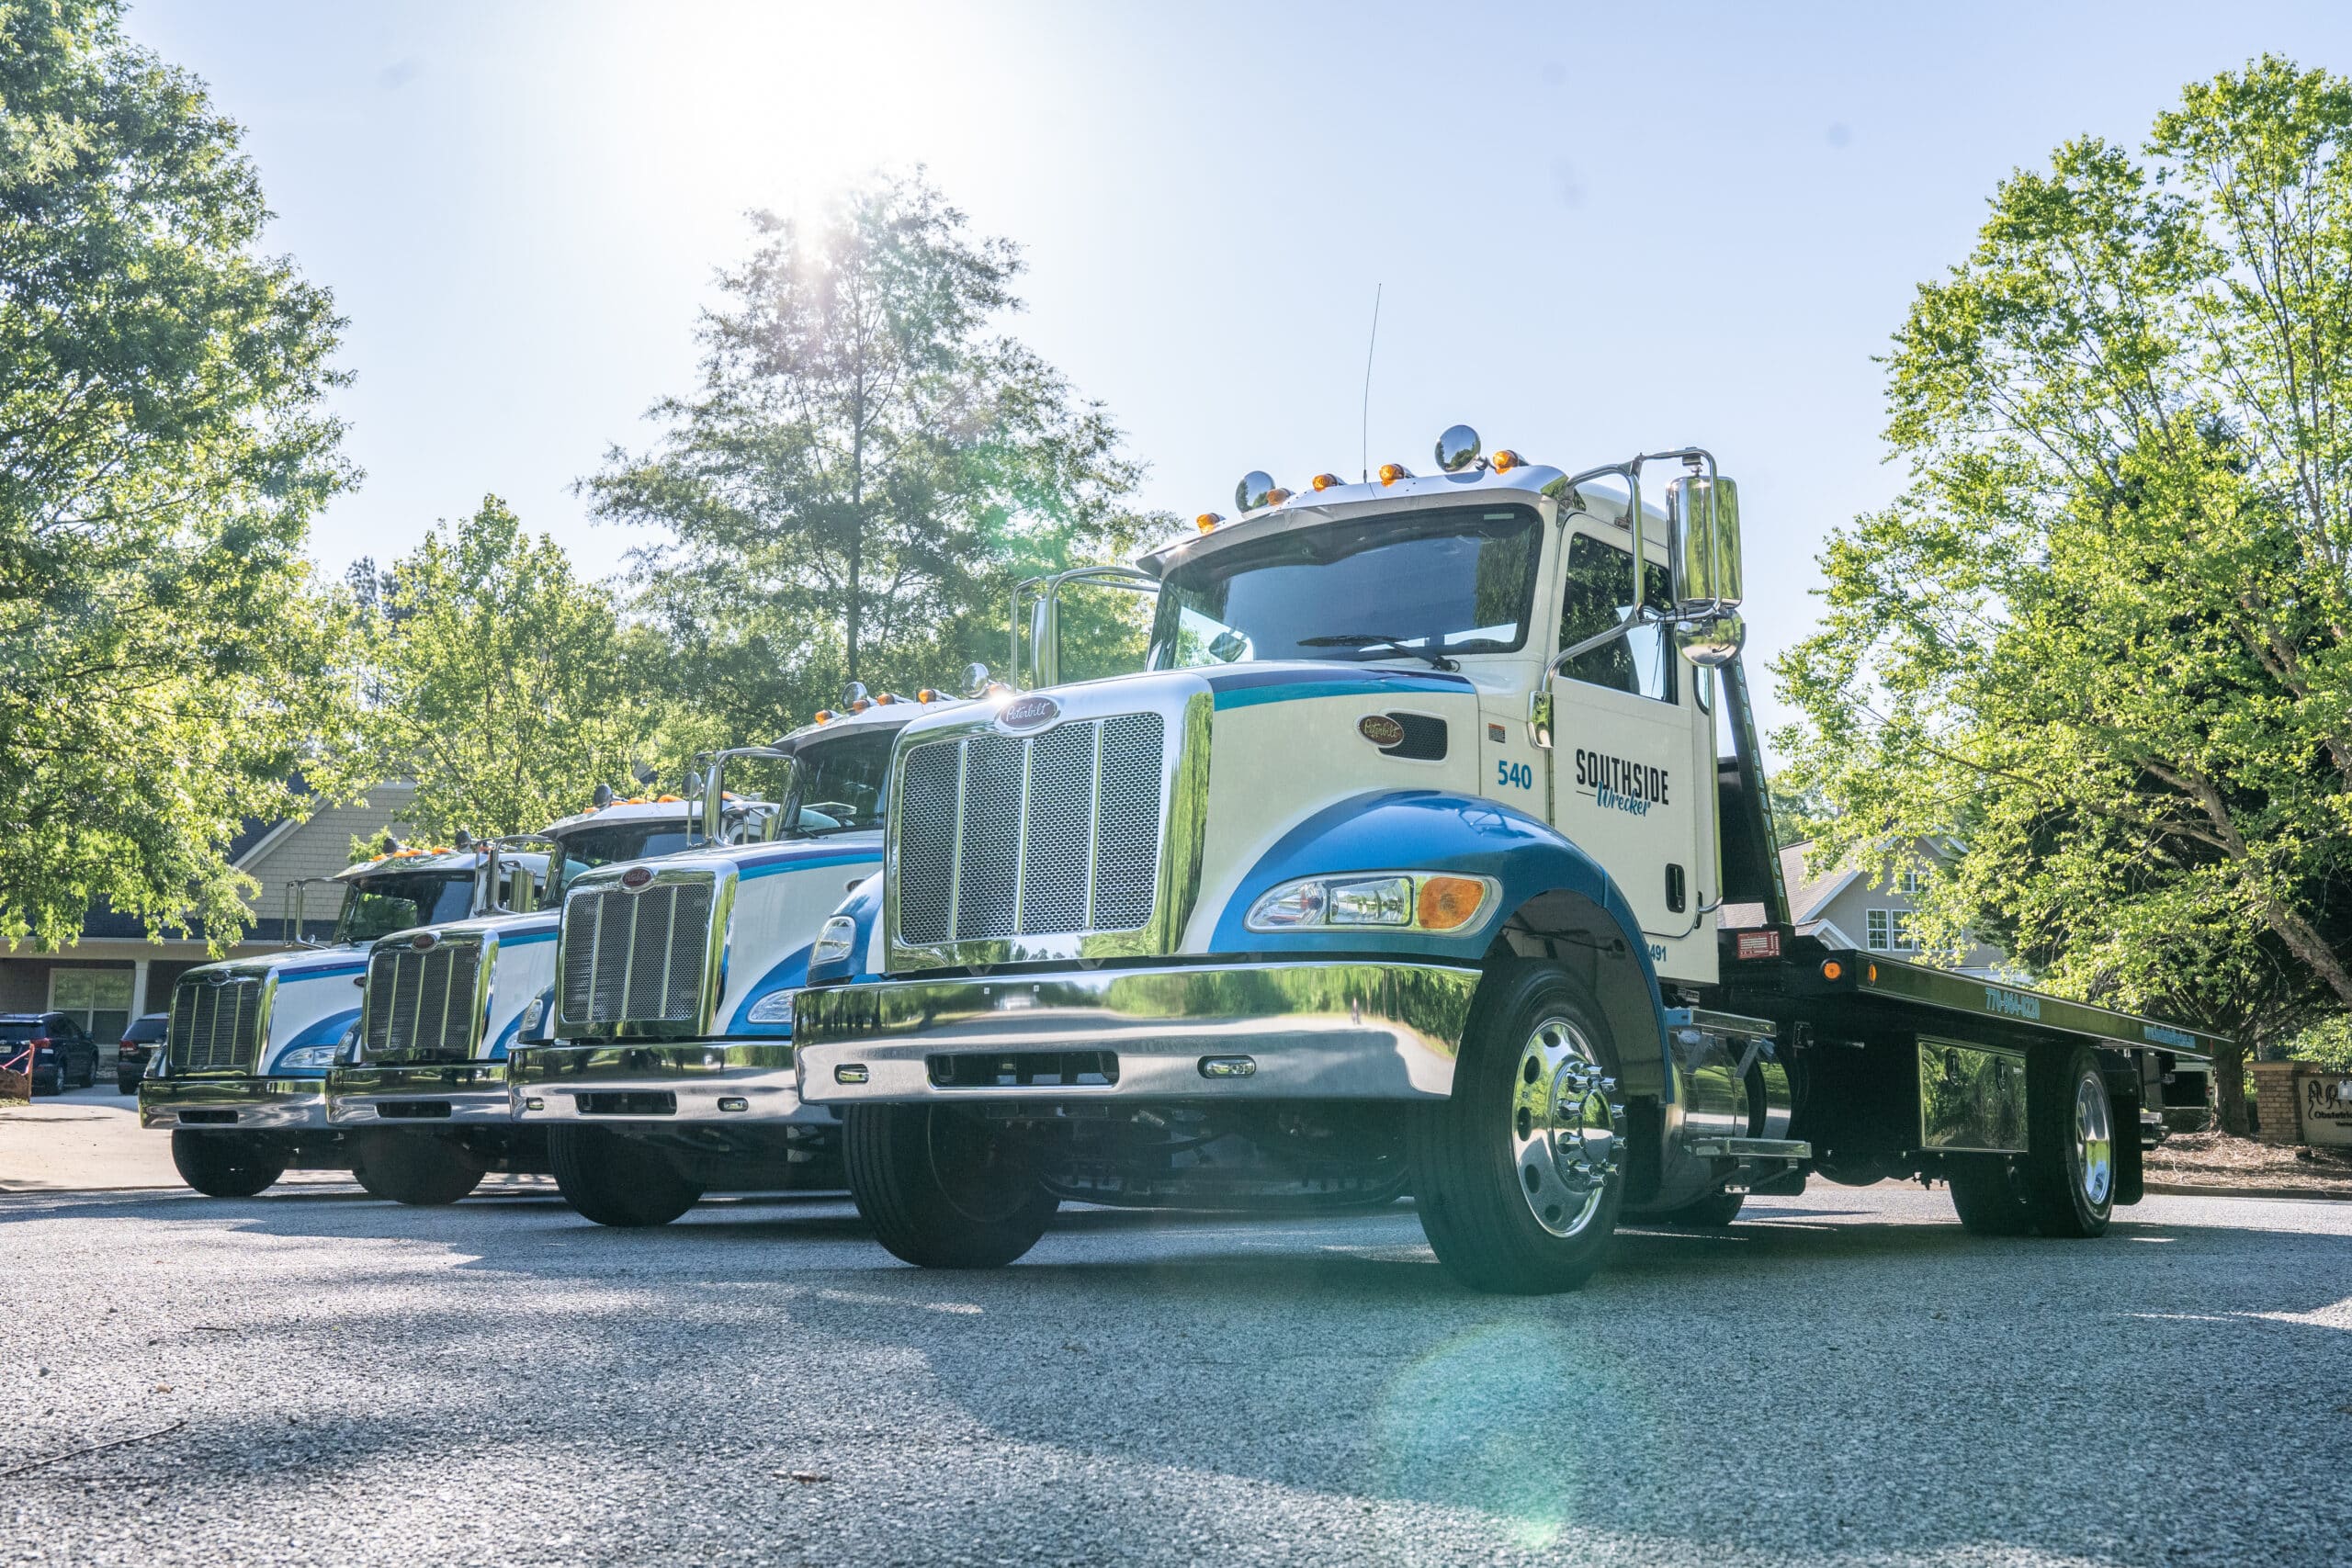 Light- vs. Heavy-Duty: Which Type of Tow Truck Is Right for Your Needs?